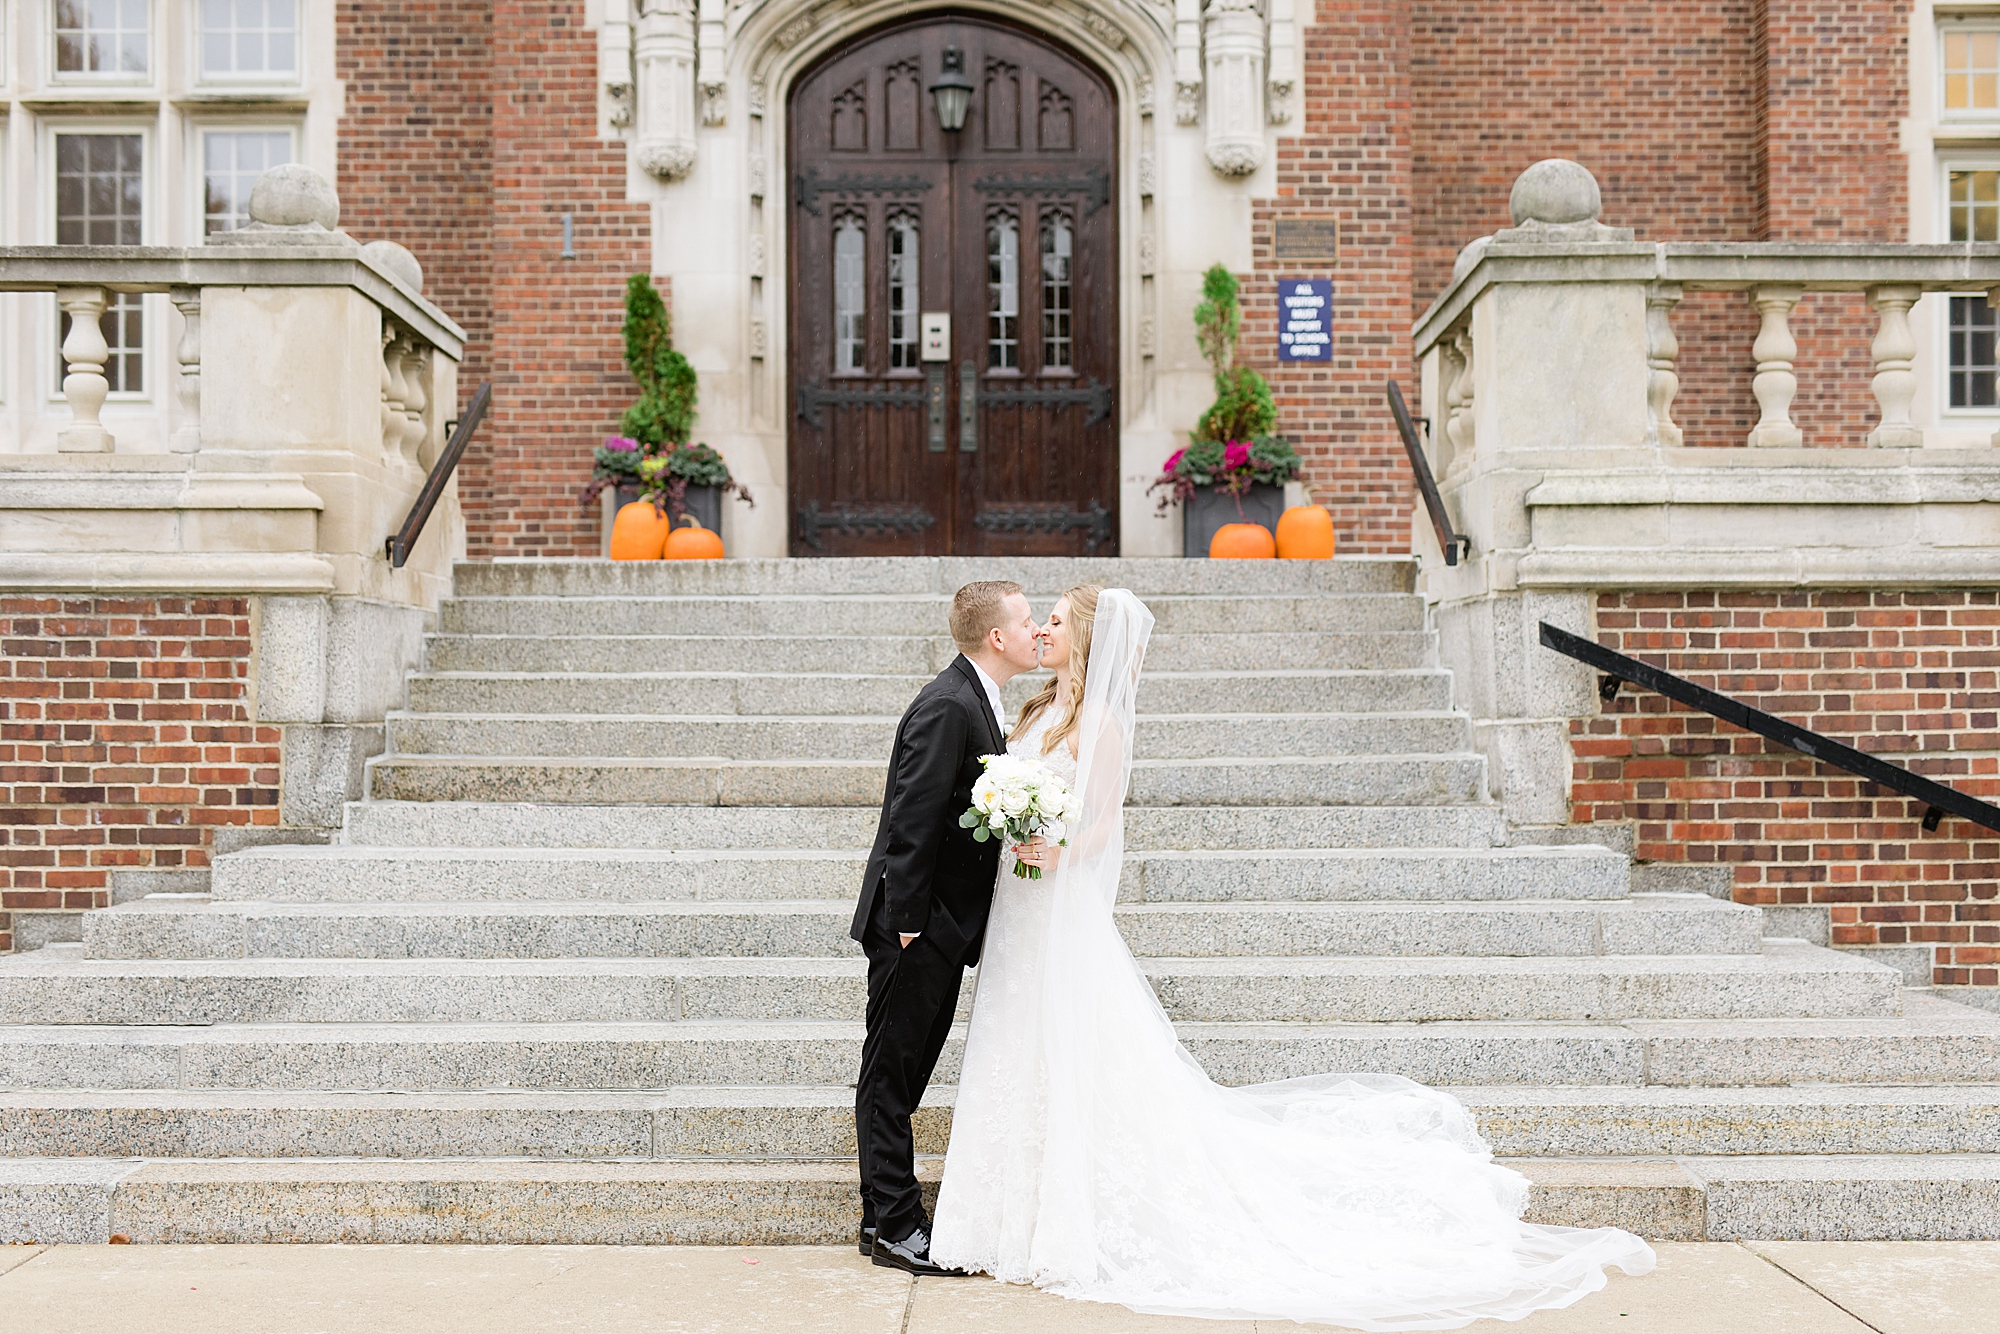 A classic rainy Grosse Pointe War Memorial wedding in late October filled with greenery and roses by Breanne Rochelle Photography.